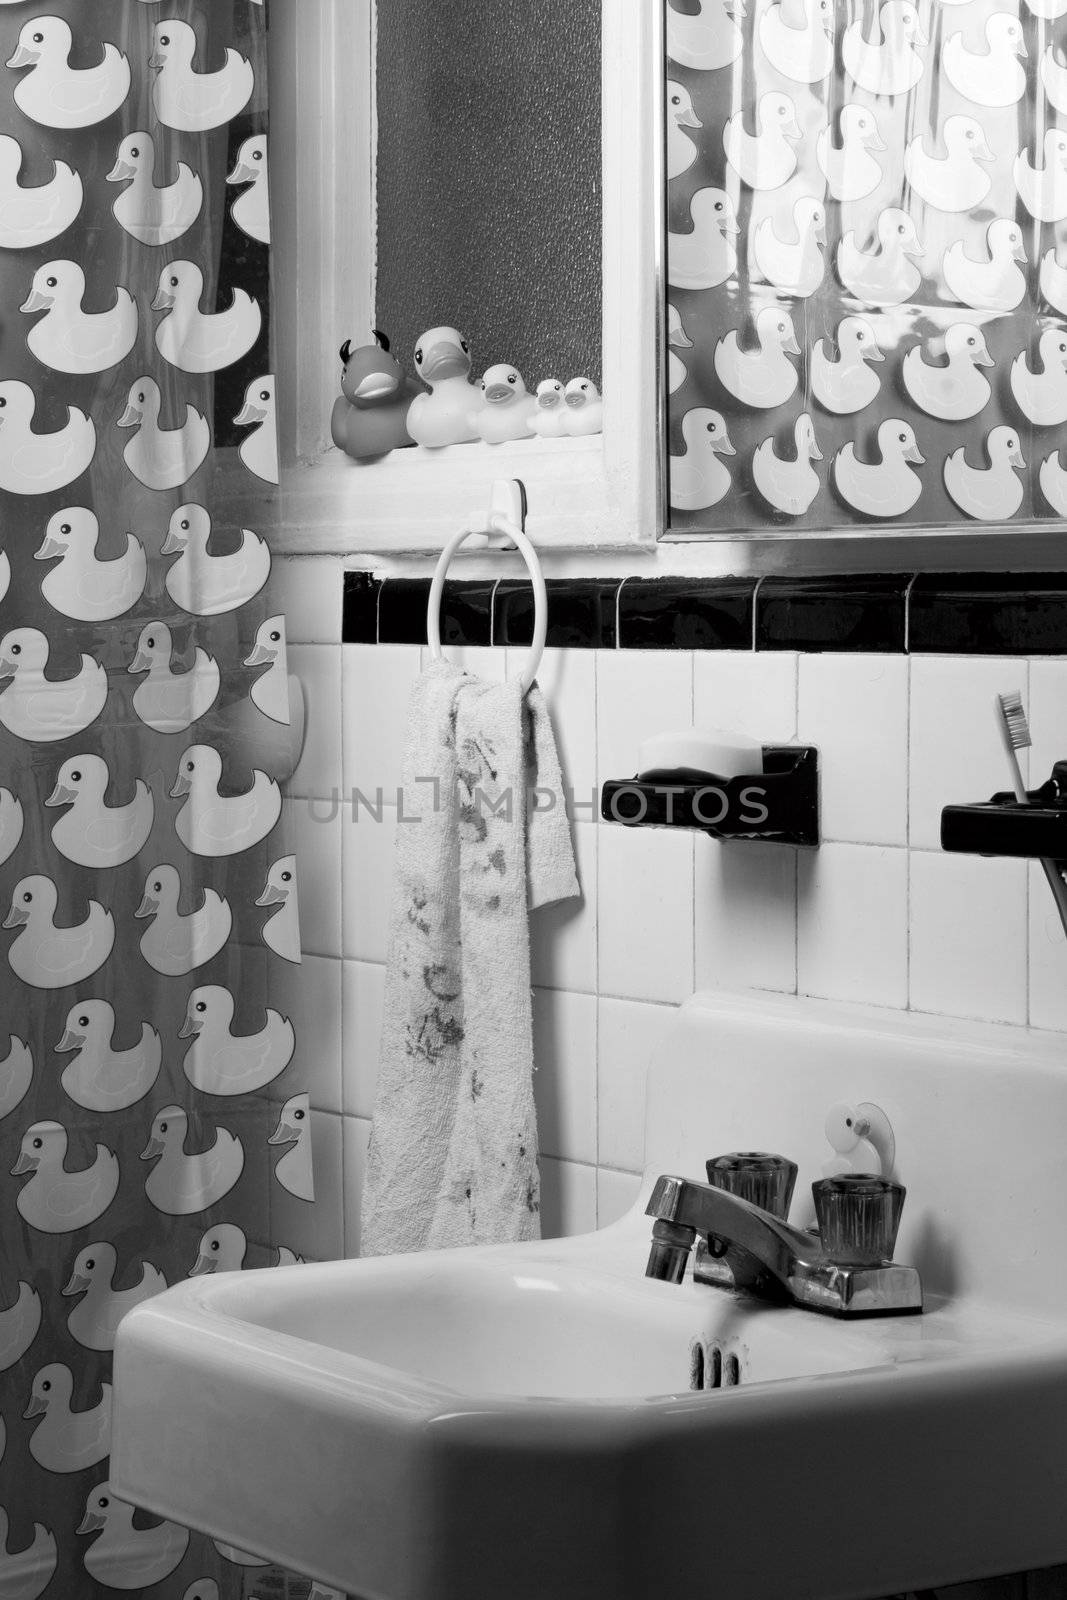 Appartment bathroom decorected with a rubber duck theme